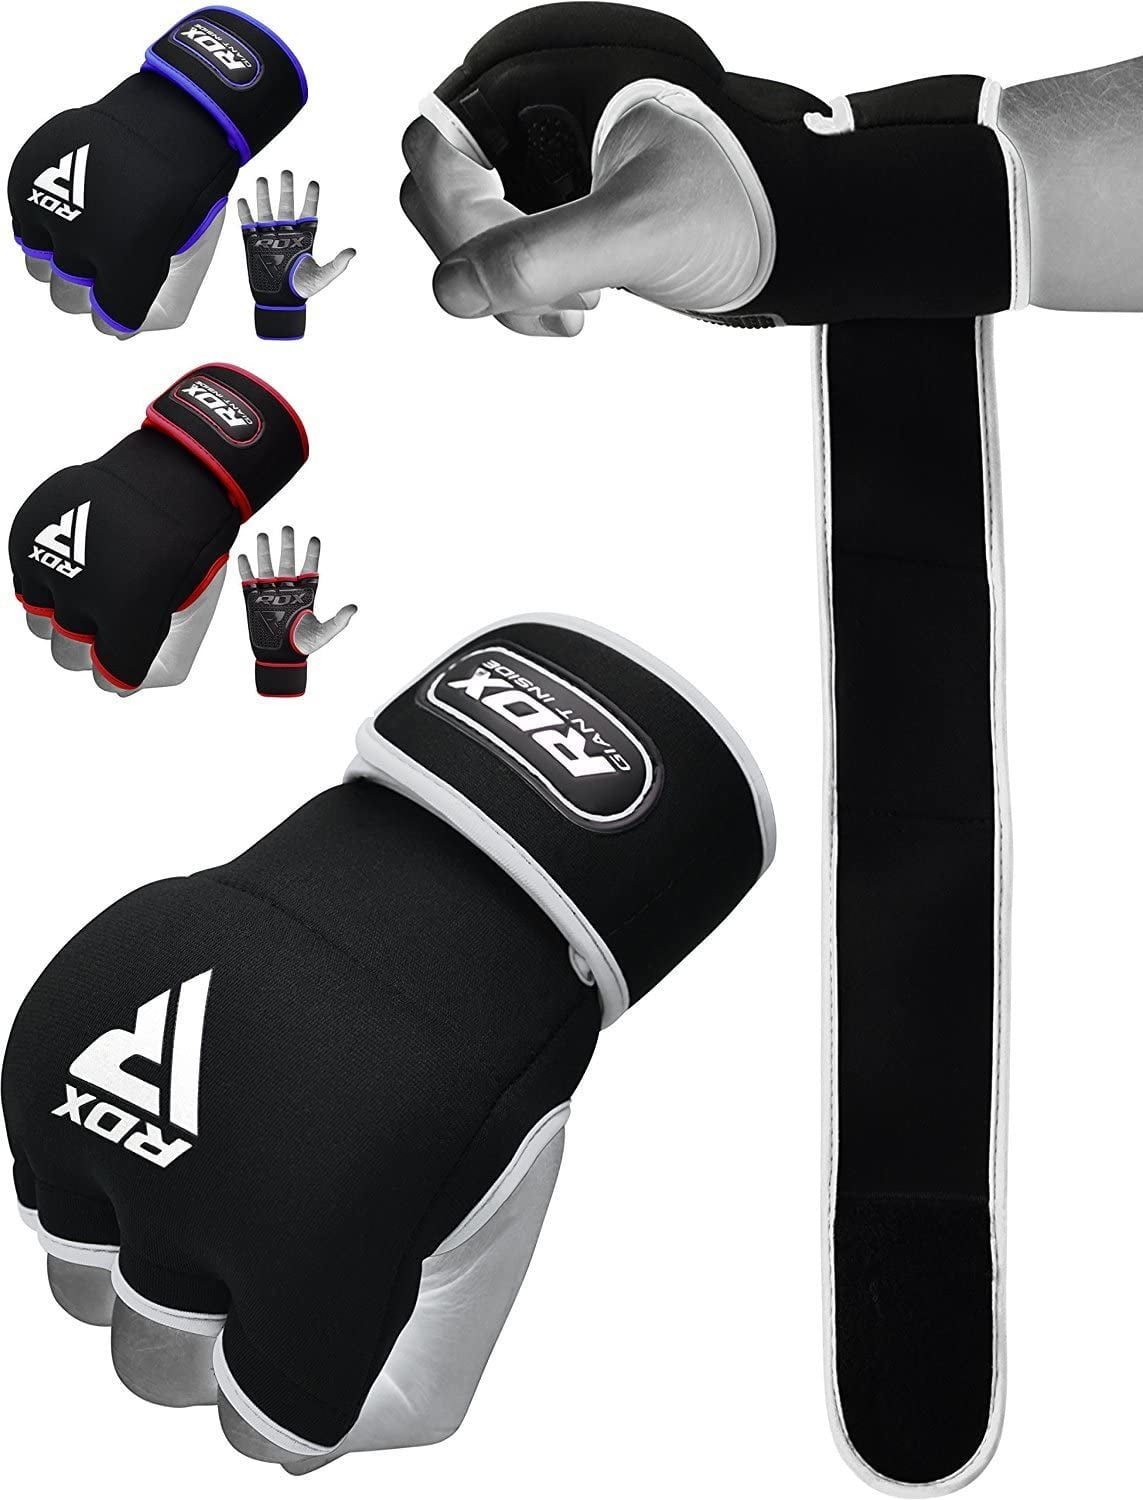 size L UNDER BOXING COTTON WHITE INNERS GLOVES SWEAT LINER HAND PROTECTOR 